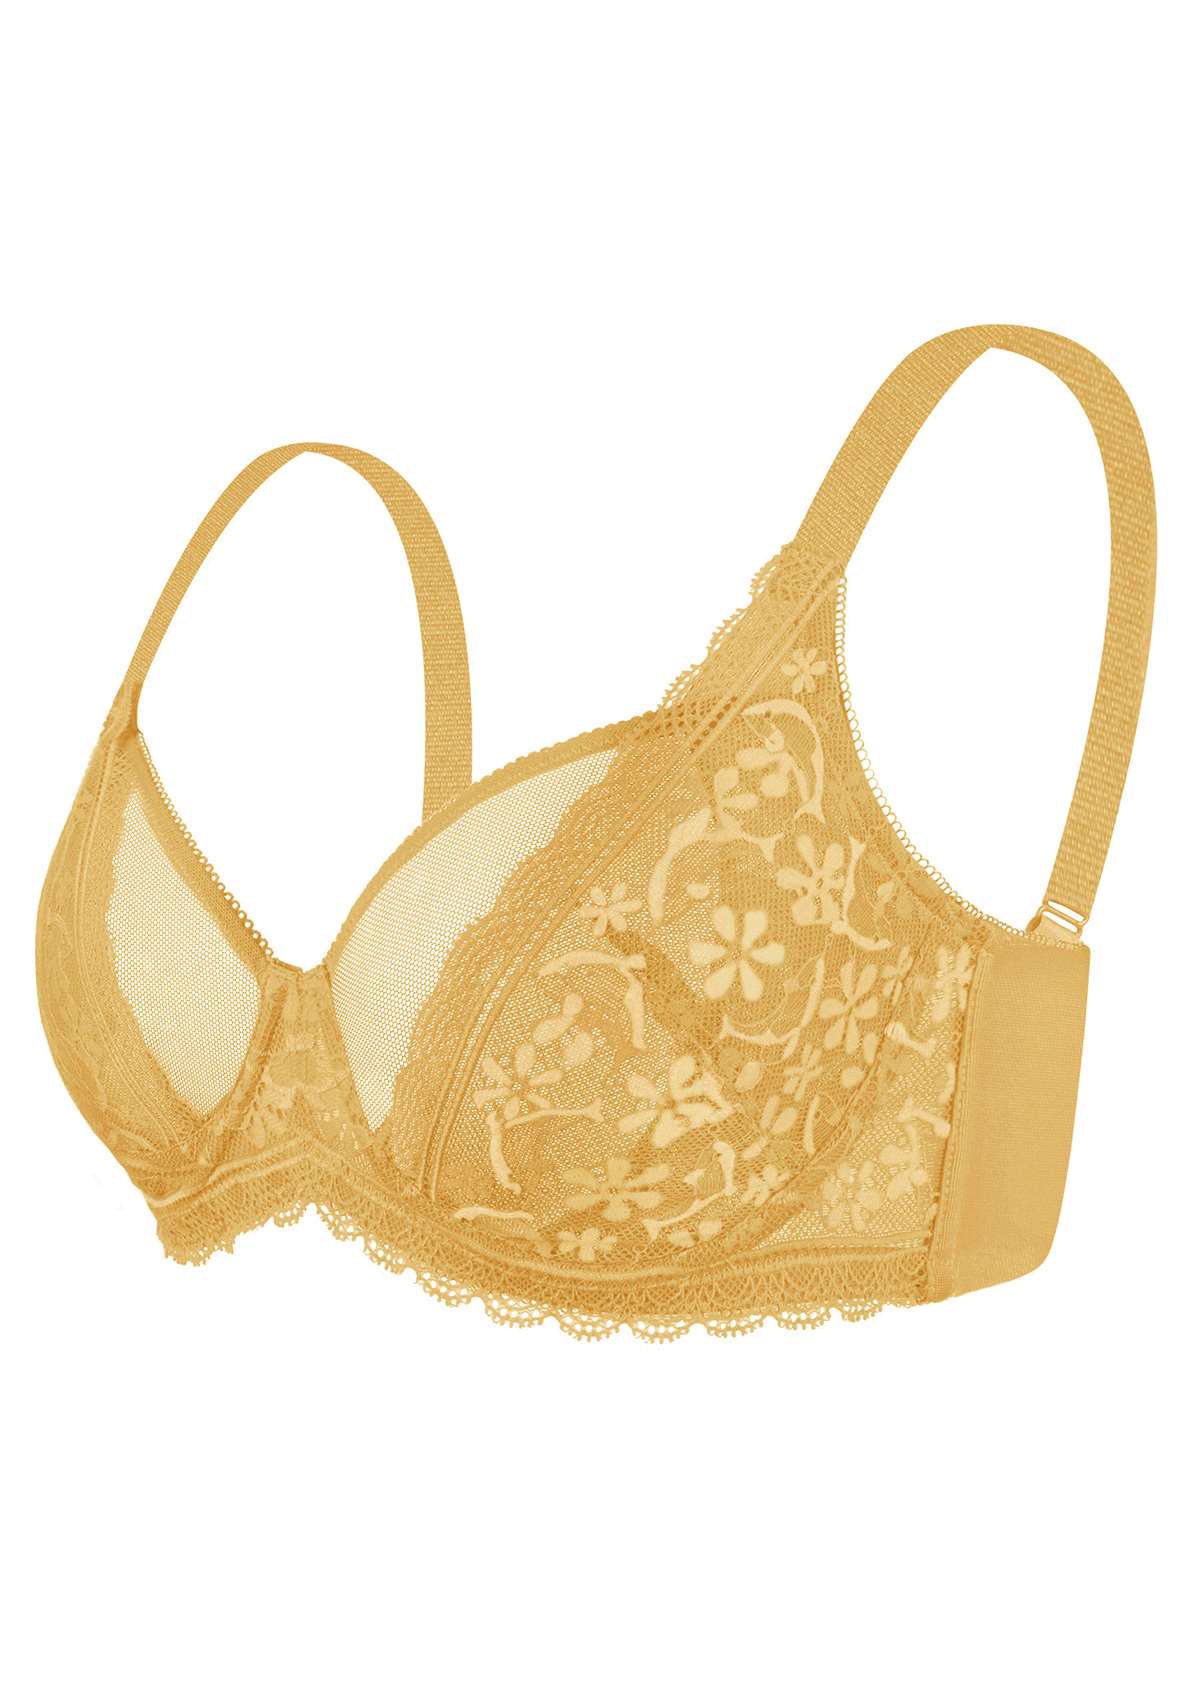 HSIA Anemone Lace Unlined Bra: Supportive, Lightweight Bra - Ginger / 34 / D